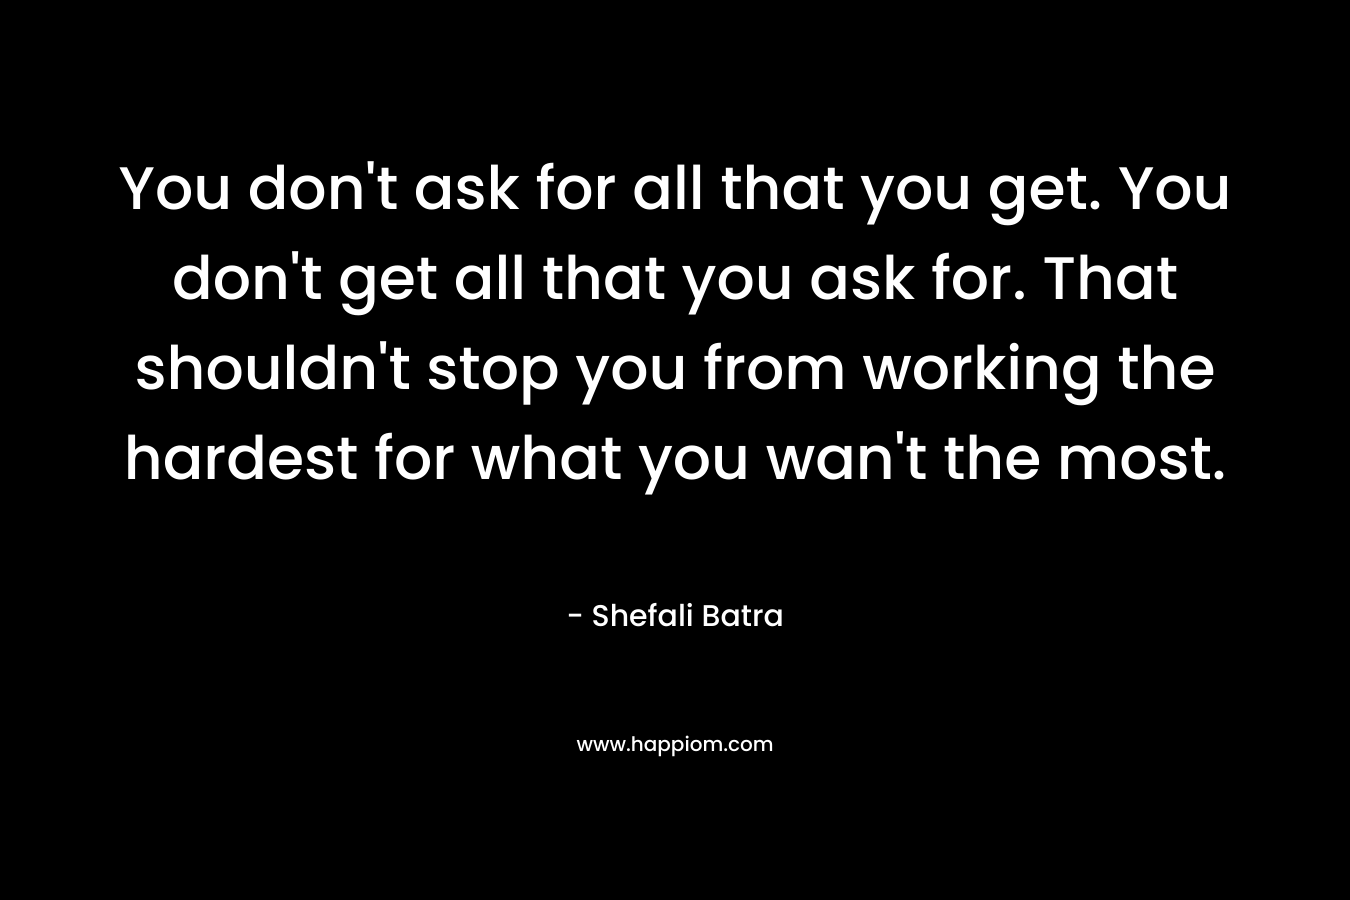 You don't ask for all that you get. You don't get all that you ask for. That shouldn't stop you from working the hardest for what you wan't the most.